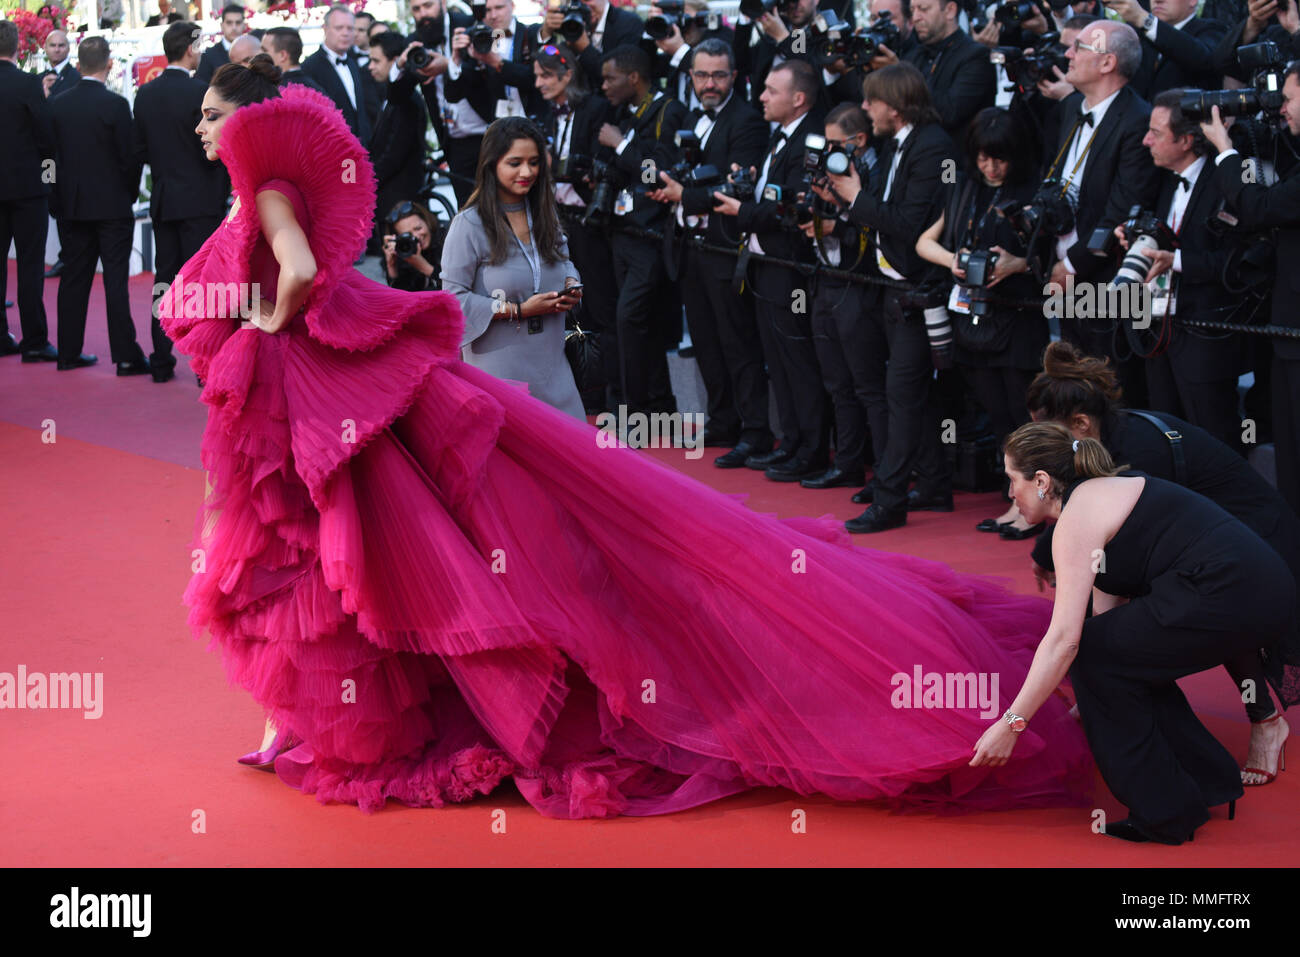 Cannes, France. May 11, 2018 - Cannes, France: Deepika Padukone attends the 'Ash is the Purest White' premiere during the 71st Cannes film festival. Credit: Idealink Photography/Alamy Live News Stock Photo